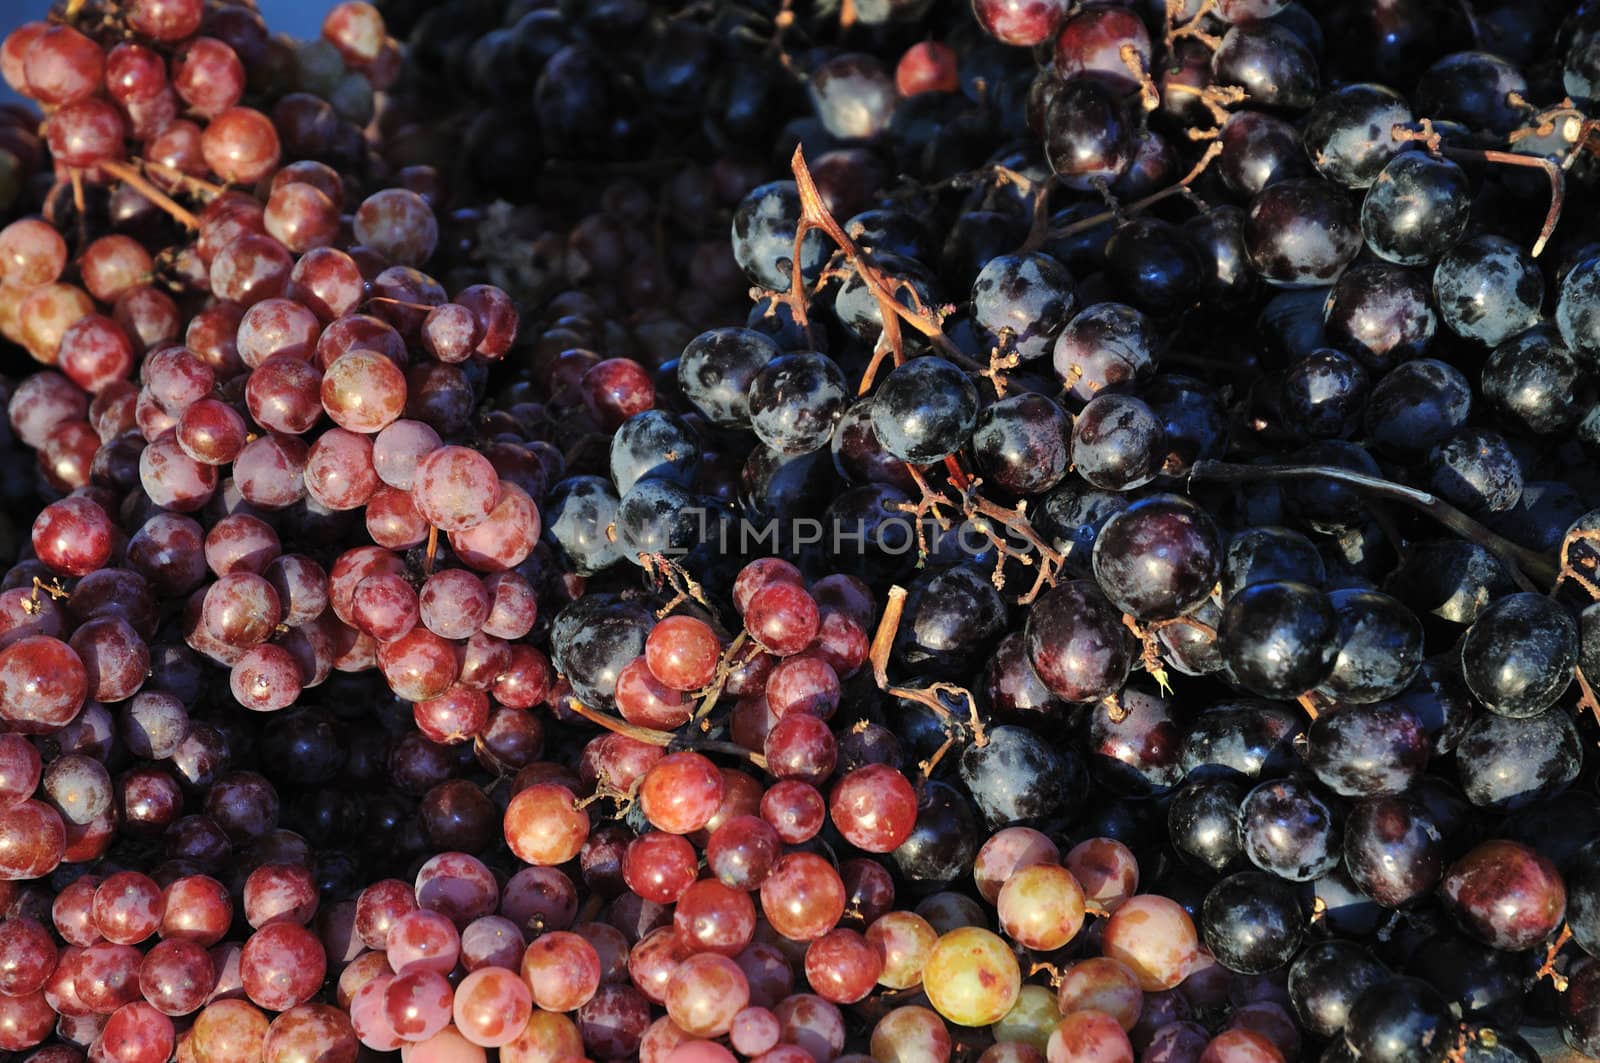 A large heap of red and black grapes at a farmer's market